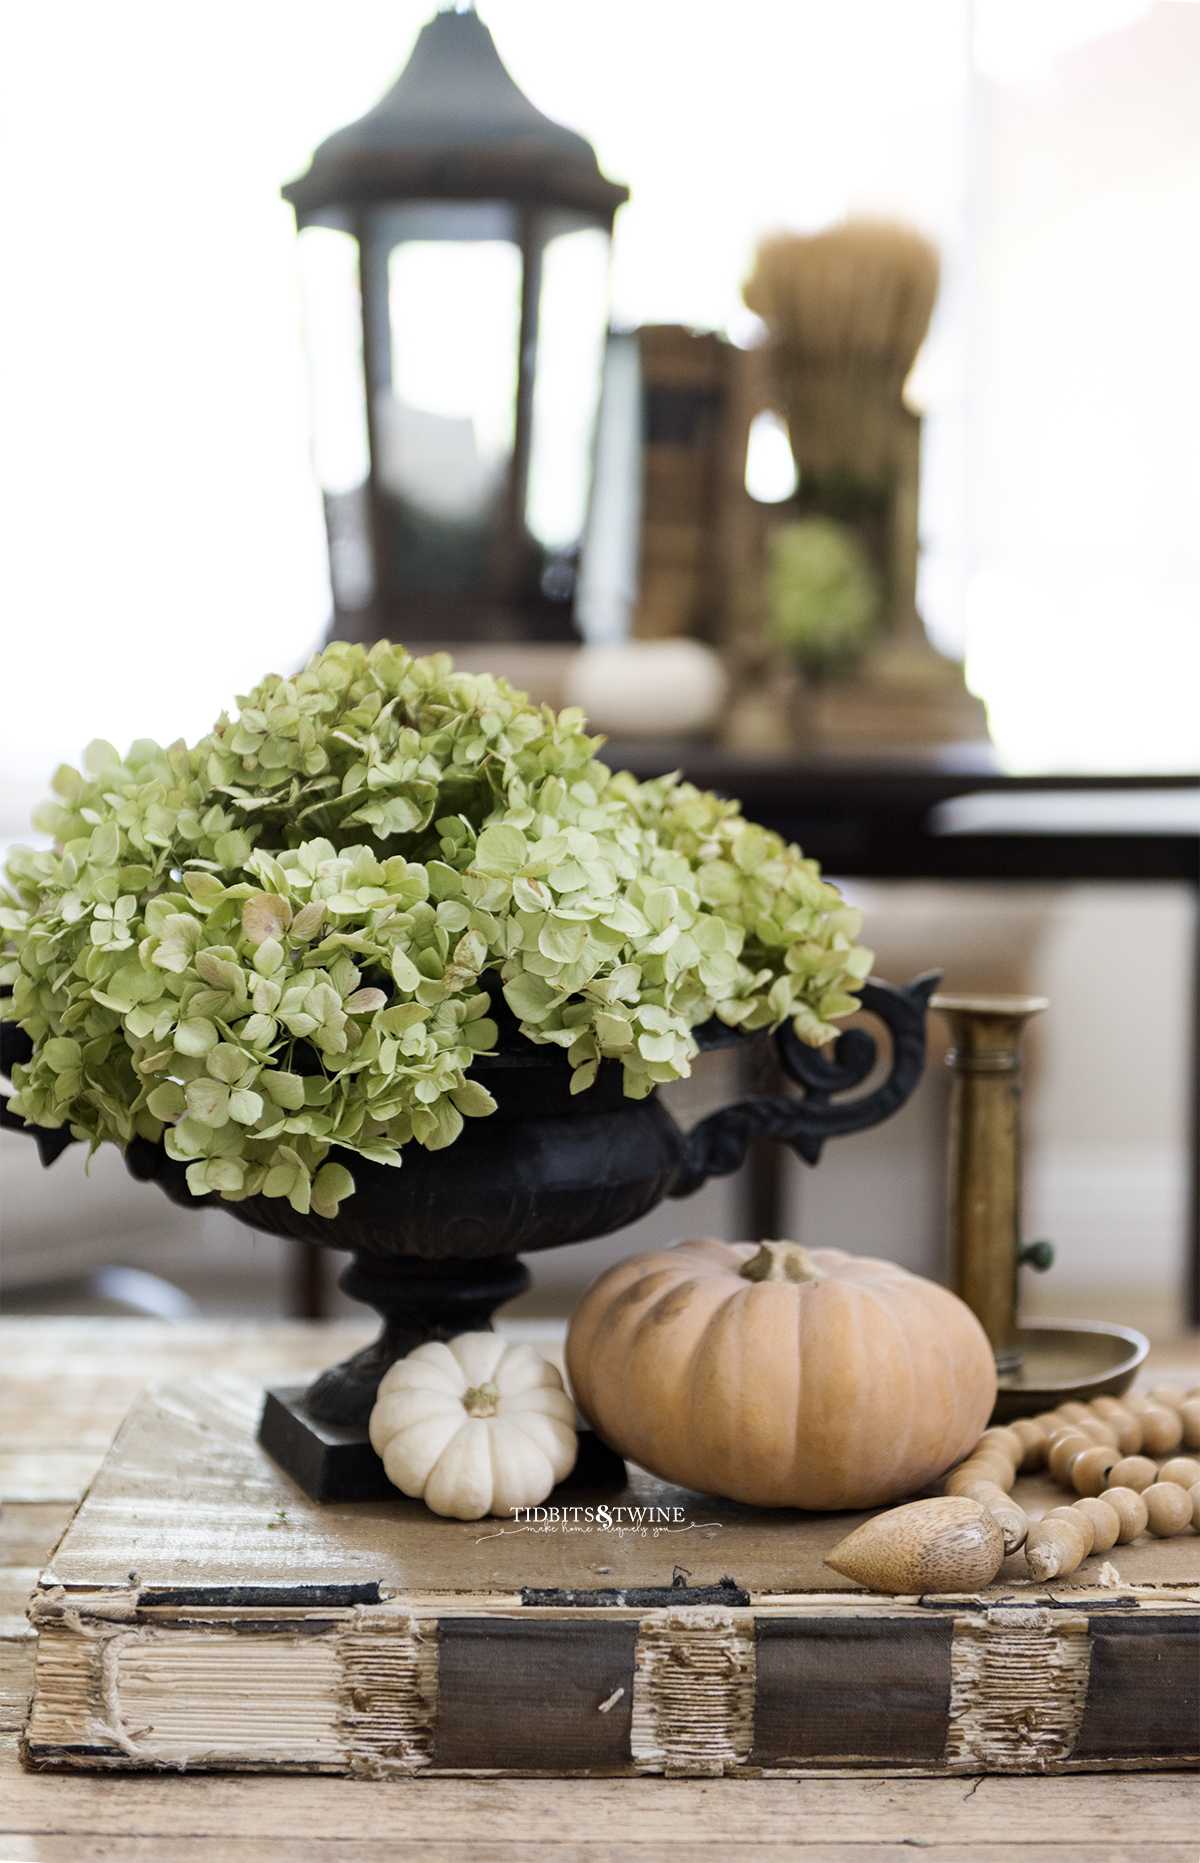 black french urn holding dried green hydrangeas with small pumpkins at base